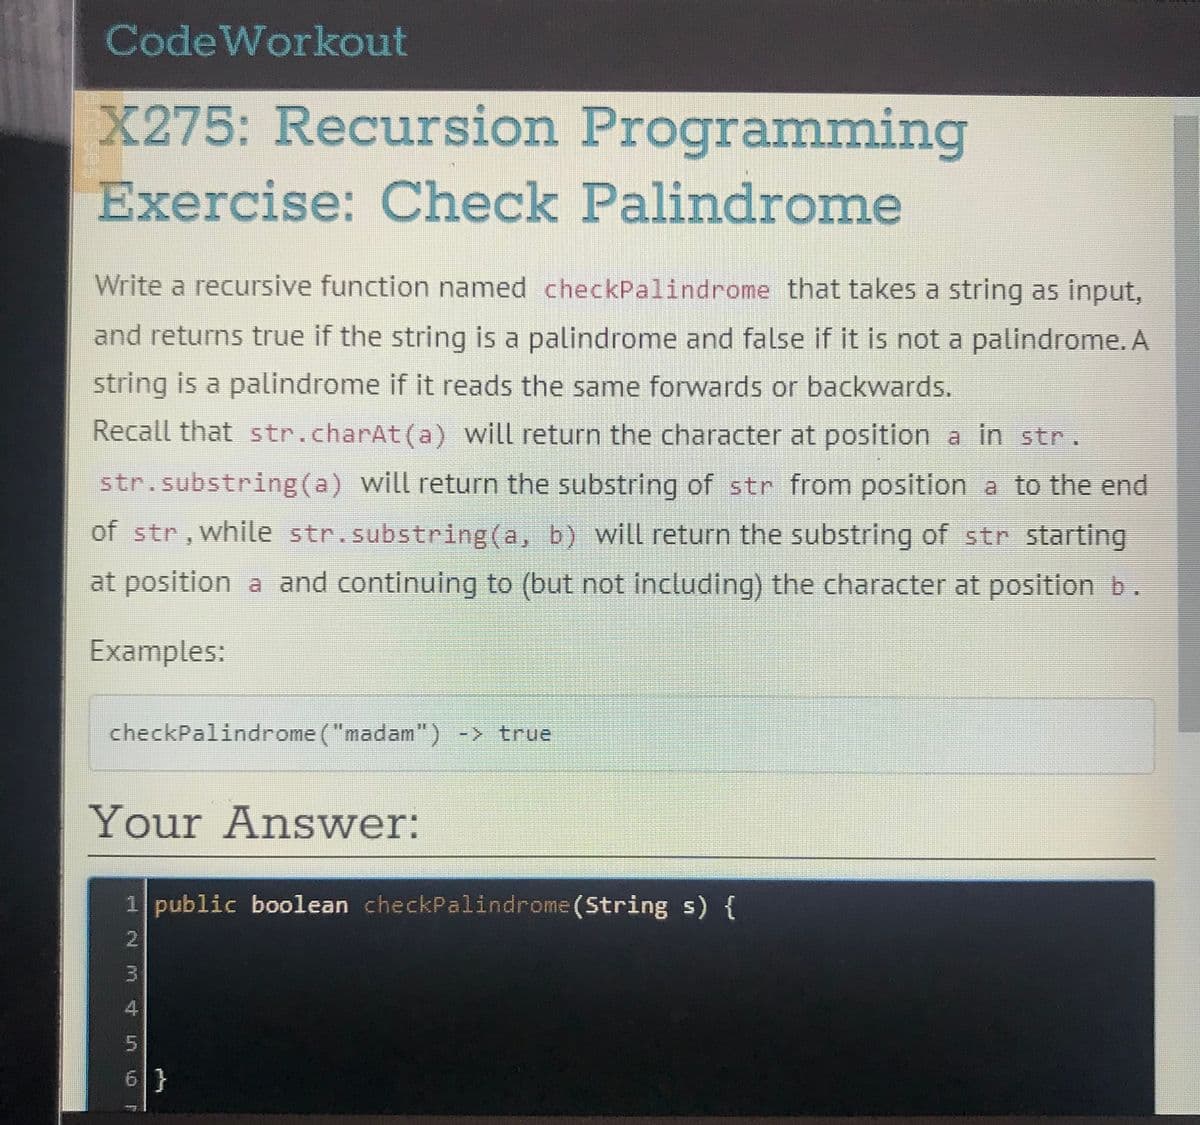 Code Workout
X275: Recursion Programming
Exercise: Check Palindrome
Write a recursive function named checkPalindrome that takes a string as input,
and returns true if the string is a palindrome and false if it is not a palindrome. A
string is a palindrome if it reads the same forwards or backwards.
Recall that str.charAt(a) will return the character at position a in str.
str.substring(a) will return the substring of str from position a to the end
of str,while str.substring(a, b) will return the substring of str starting
at position a and continuing to (but not including) the character at position b.
Examples:
checkPalindrome ("madam") -> true
Your Answer:
1 public boolean checkPalindrome(String s) {
2.
6 }
